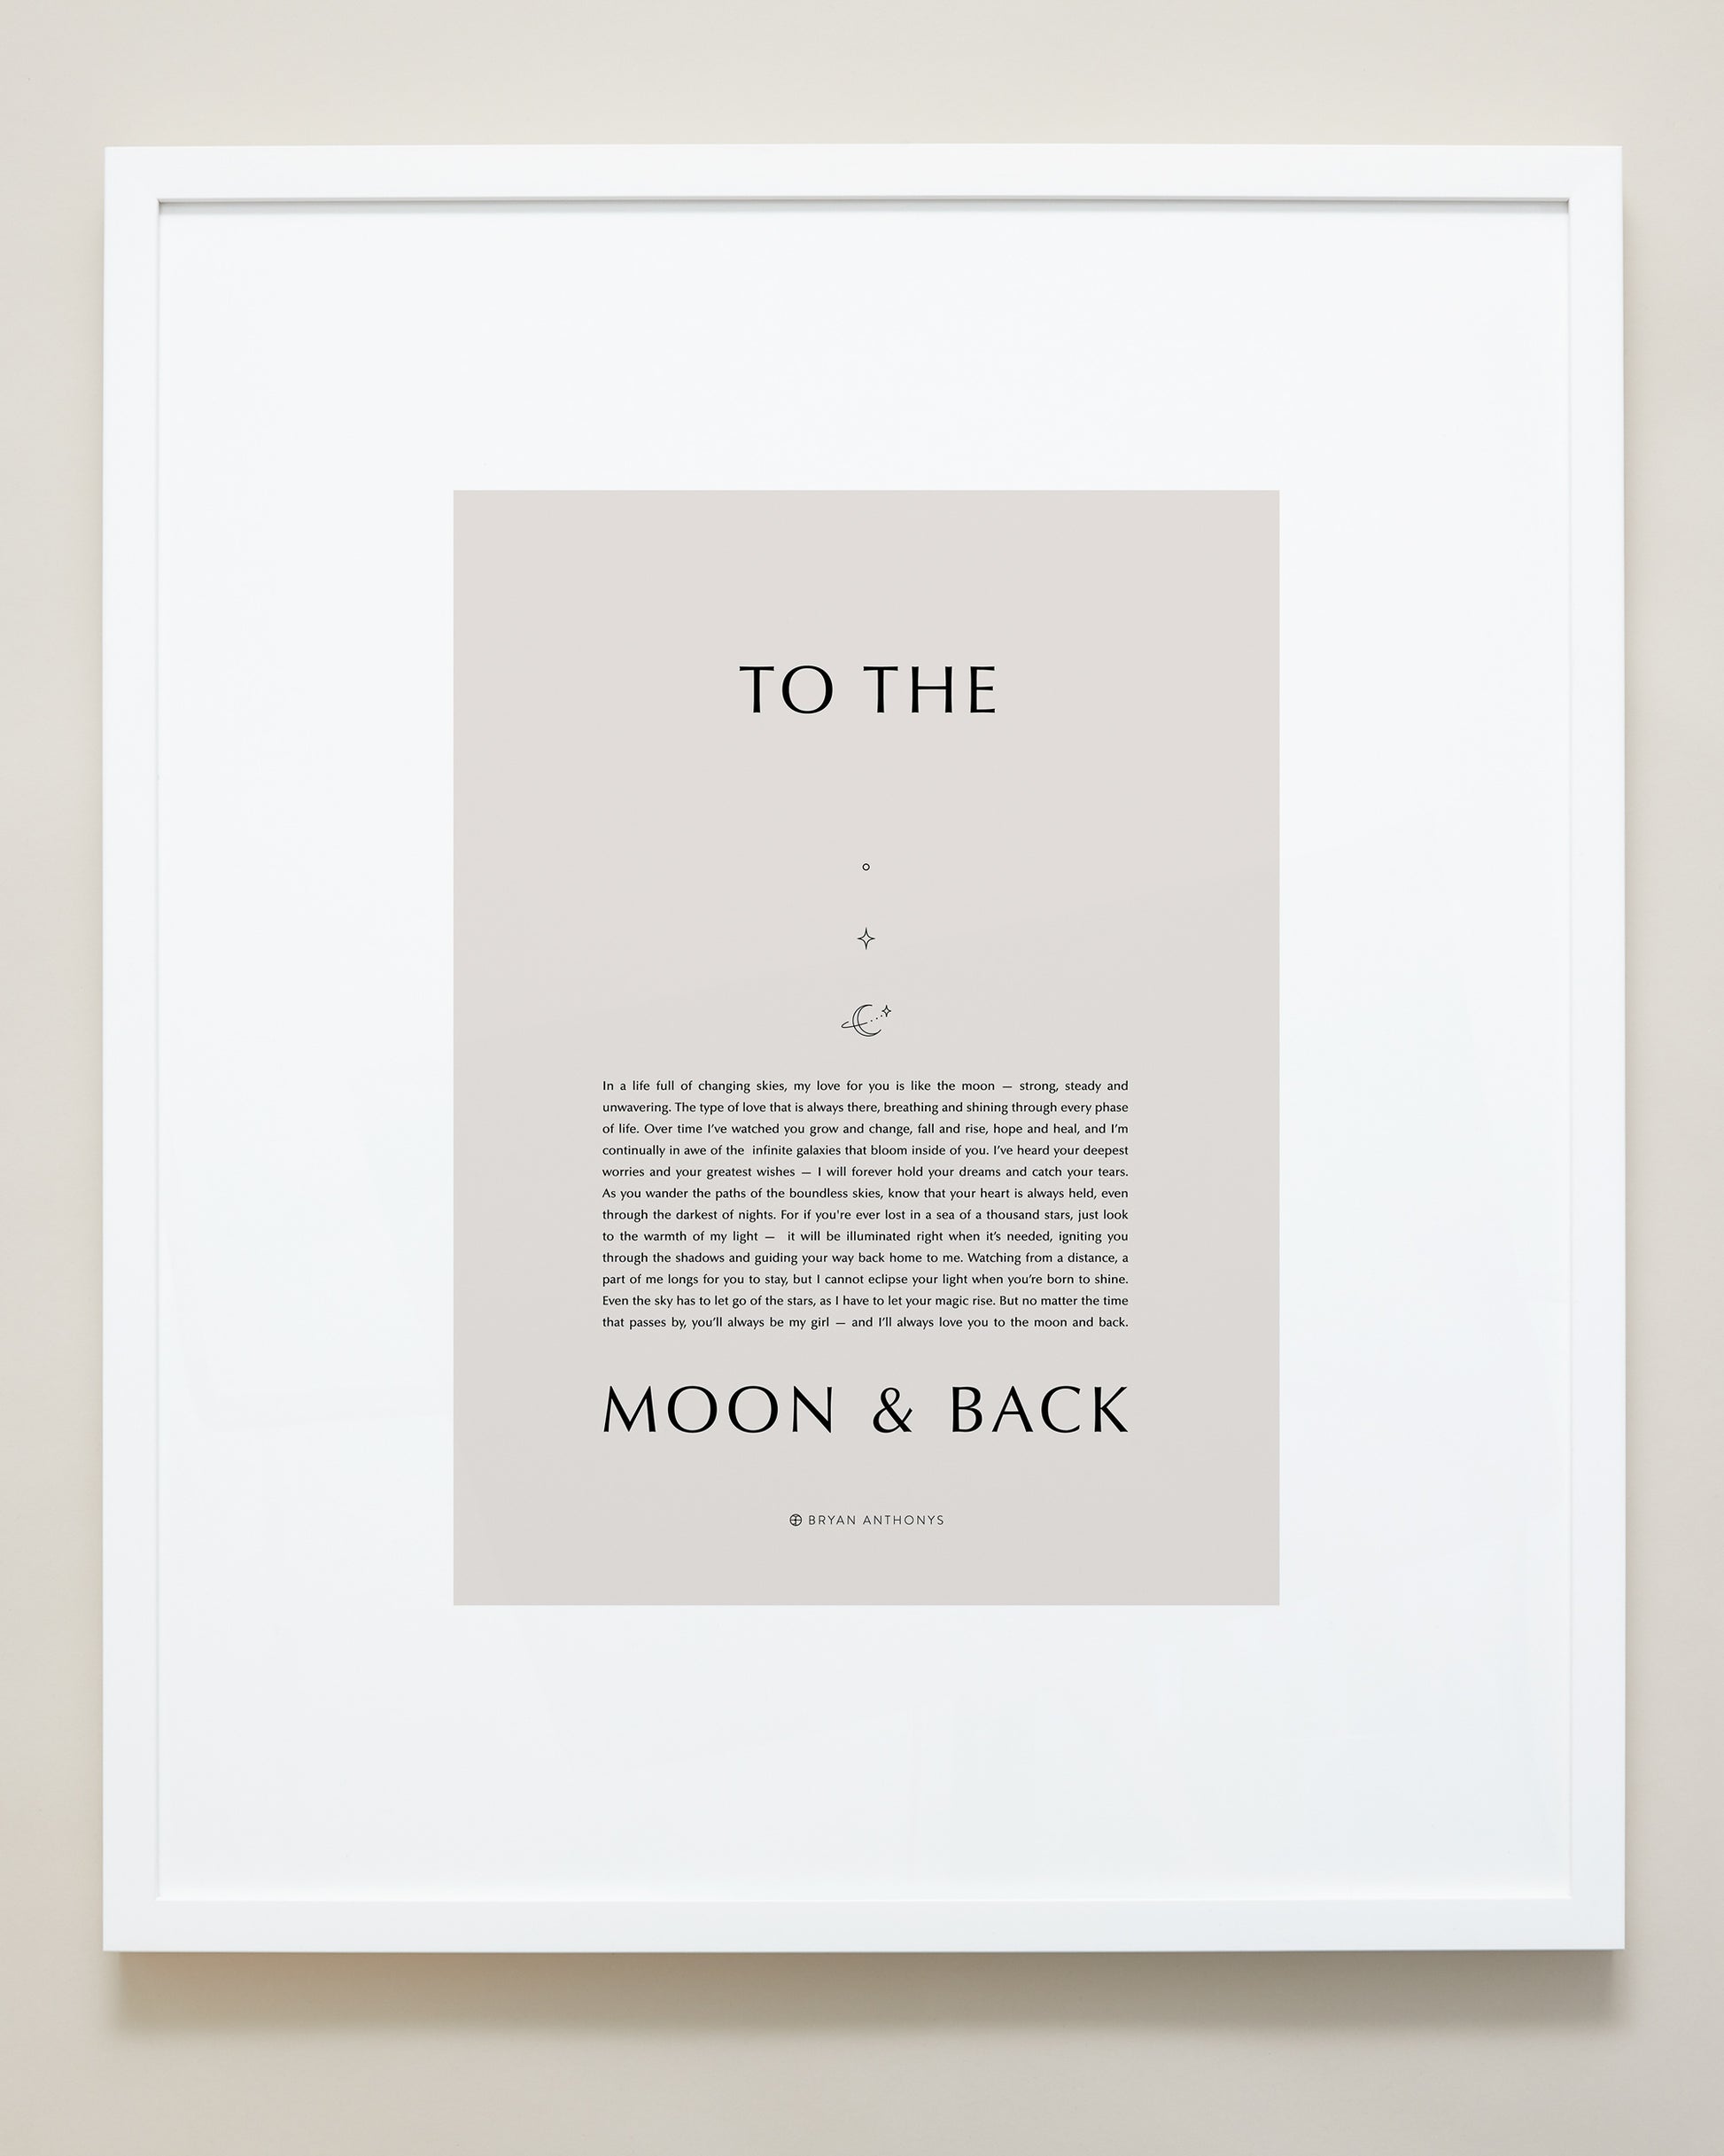 Bryan Anthonys Home Decor Purposeful Prints To The Moon & Back Iconic Framed Print Tan Art With White Frame 20x24